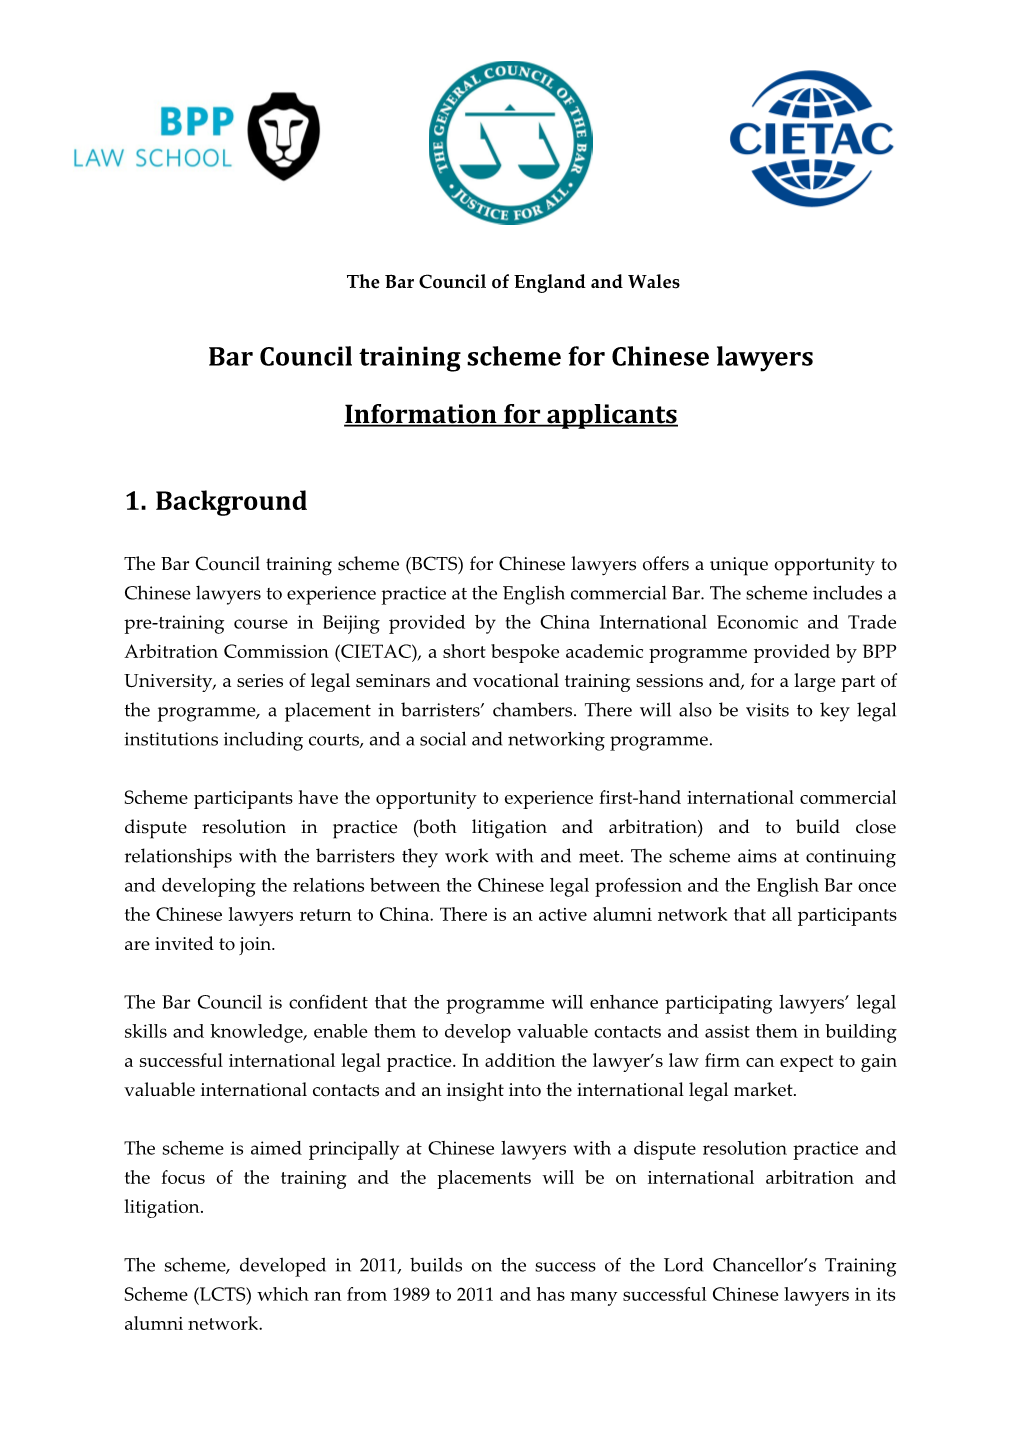 Bar Council Training Scheme for Chinese Lawyers